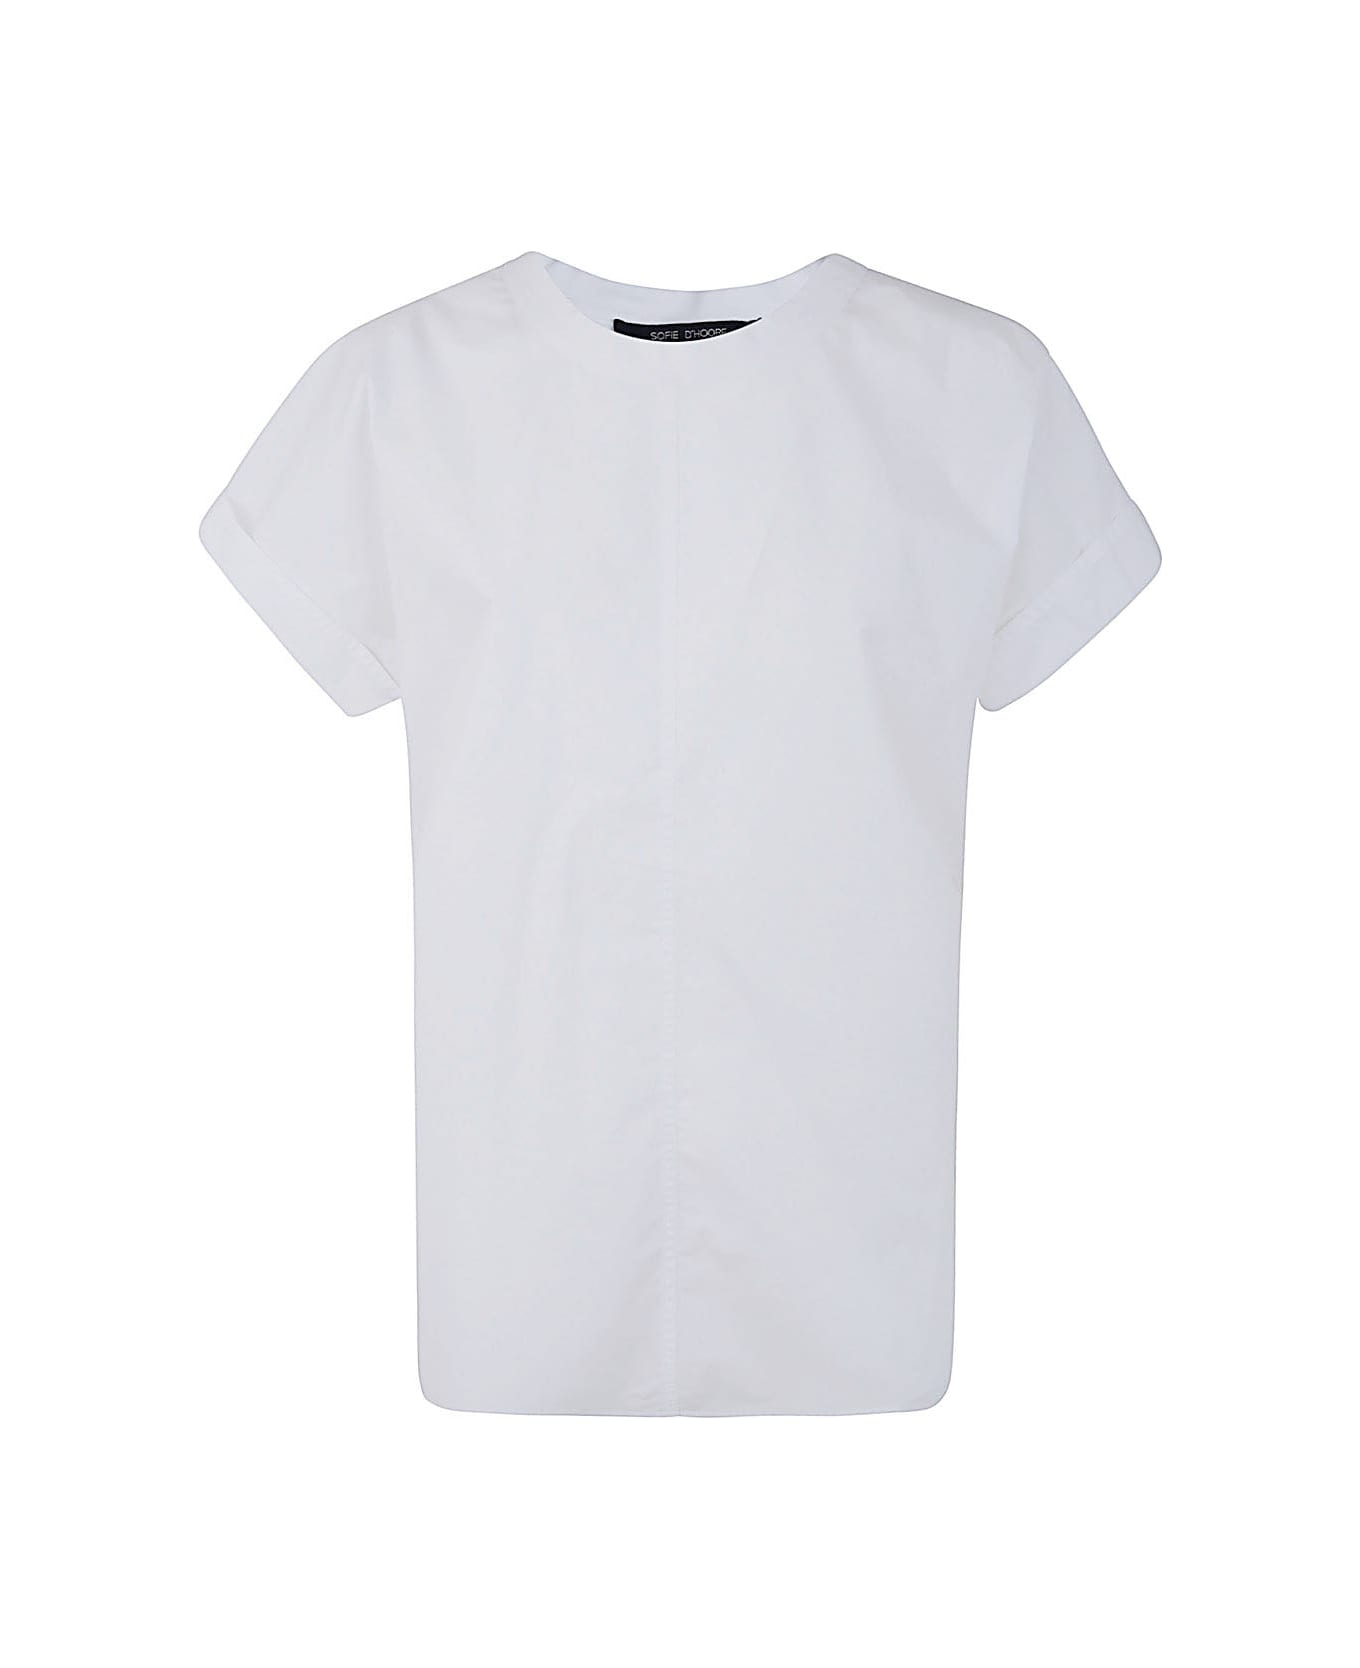 Sofie d'Hoore Top With Short Reversed Sleeves - White トップス